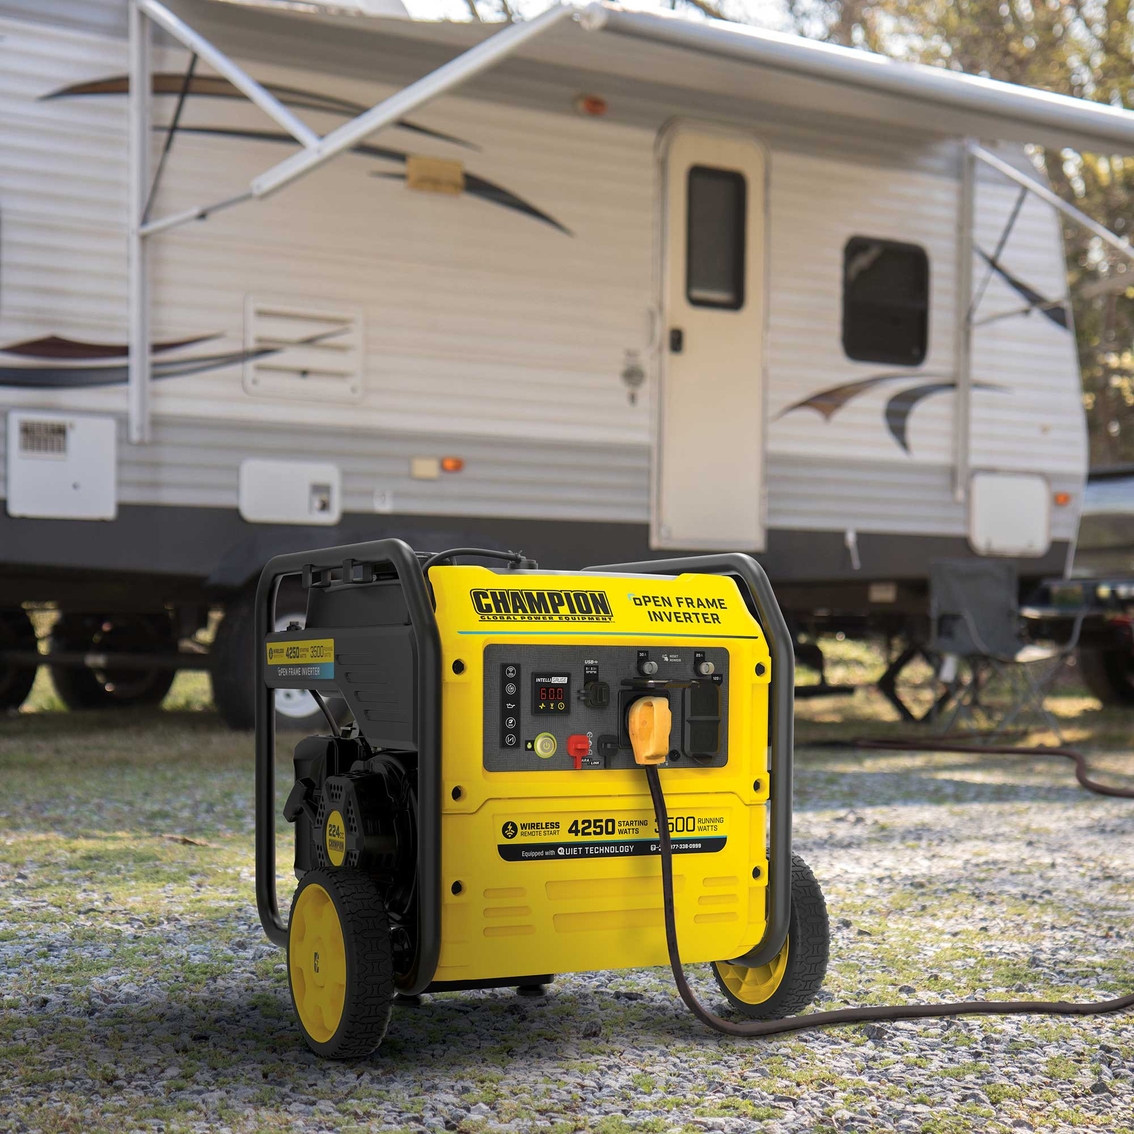 Champion 4250W Wireless Remote Start Open Frame Inverter Generator with Quiet Tech - Image 7 of 8